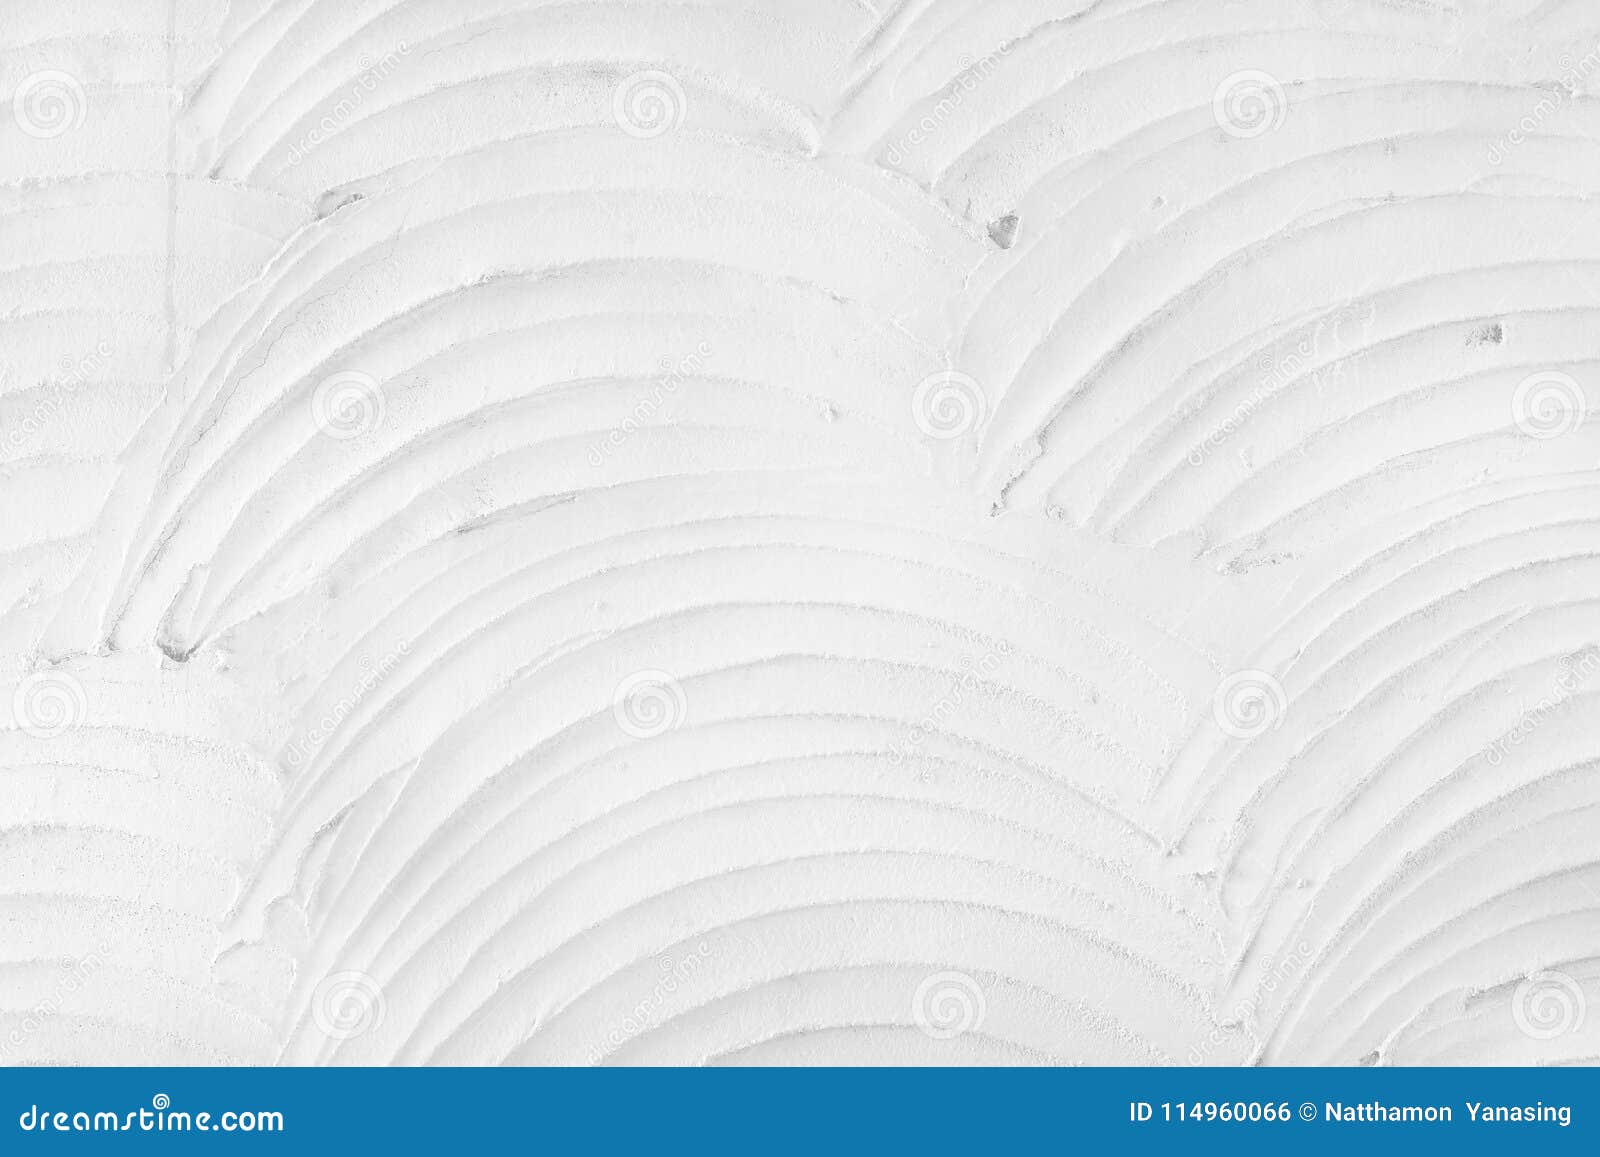 Texture Of White Color Cement Or Plaster For Background